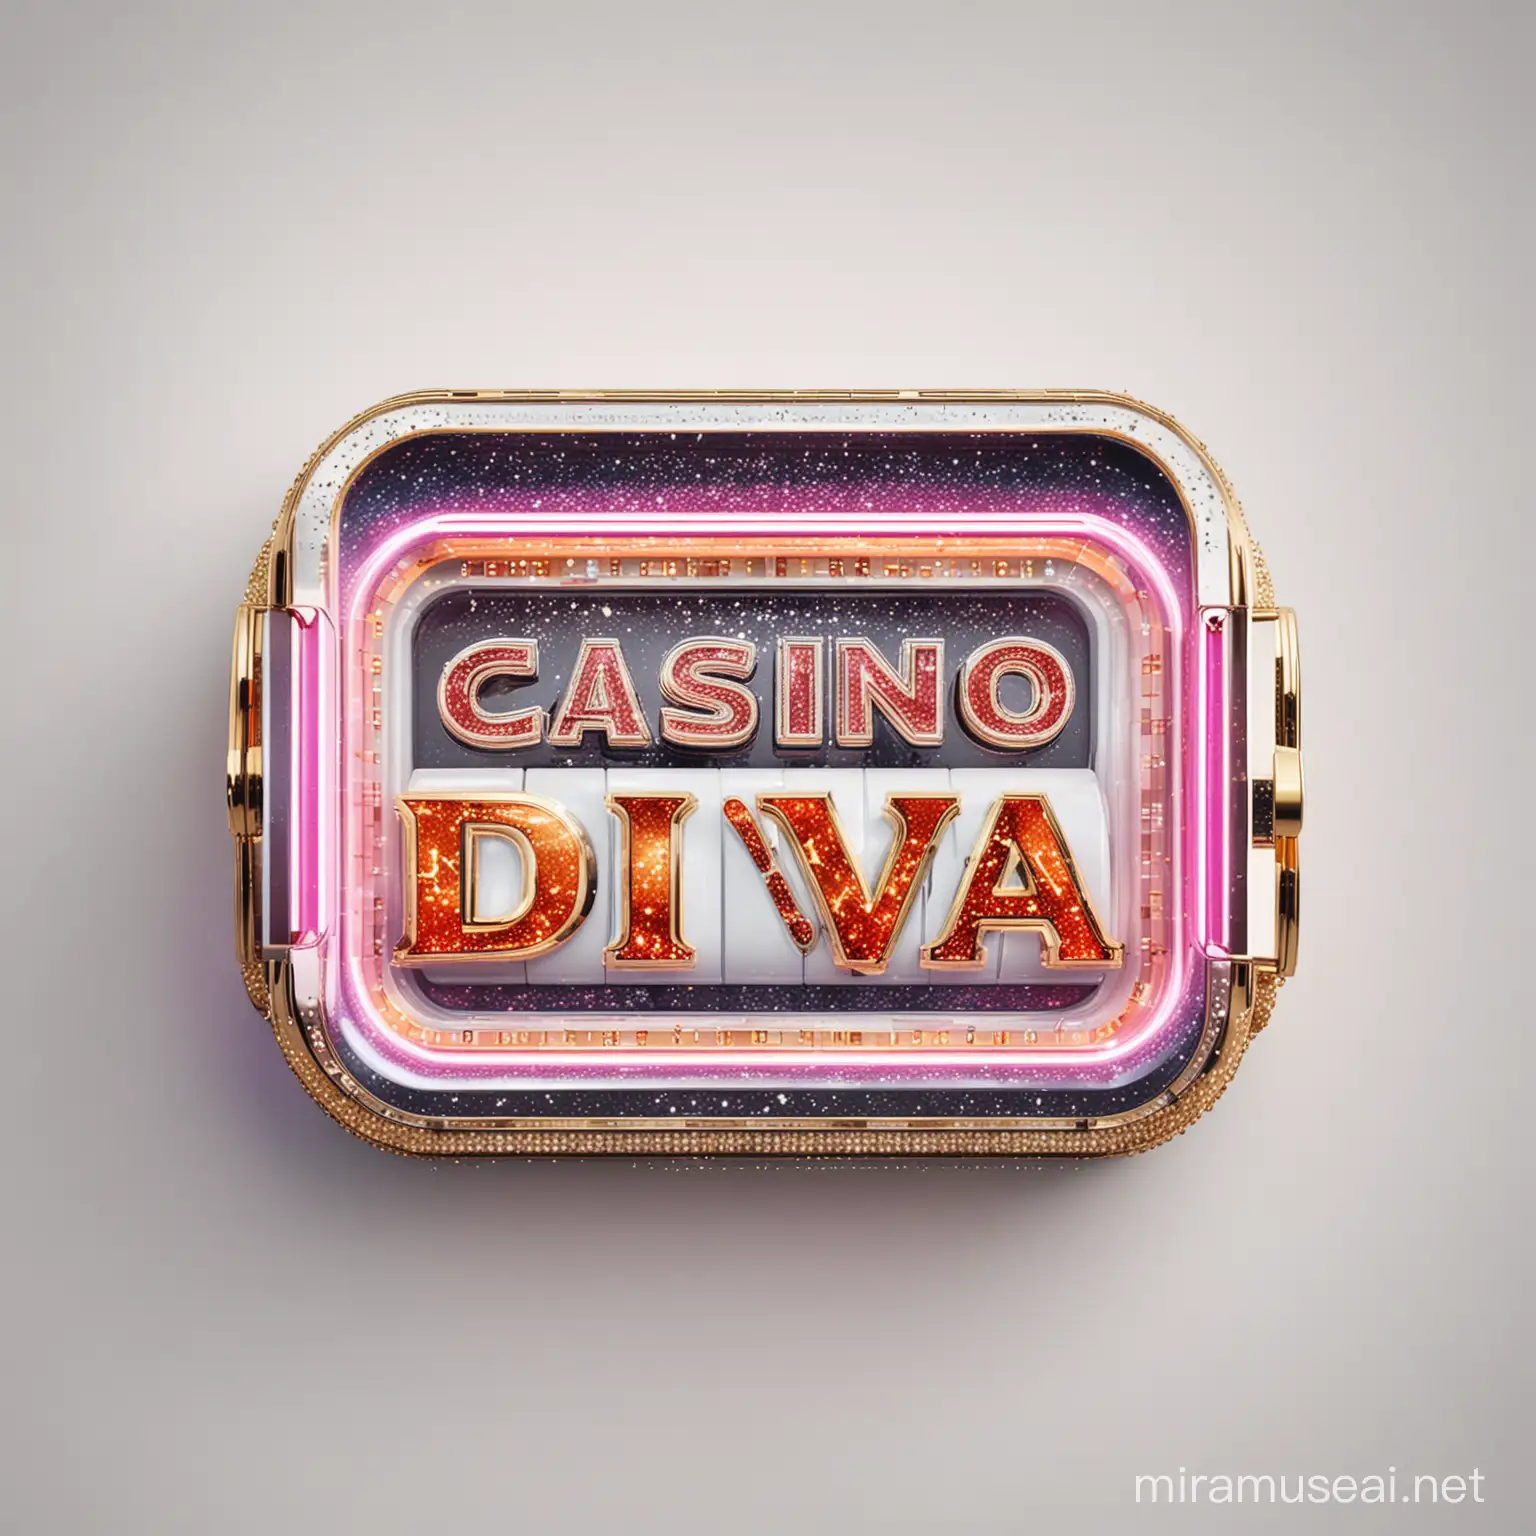  abstract logo of a slot machine with neon lights on a white background, The words "Casino Diva" displayed in the middle of the logo with glitter font